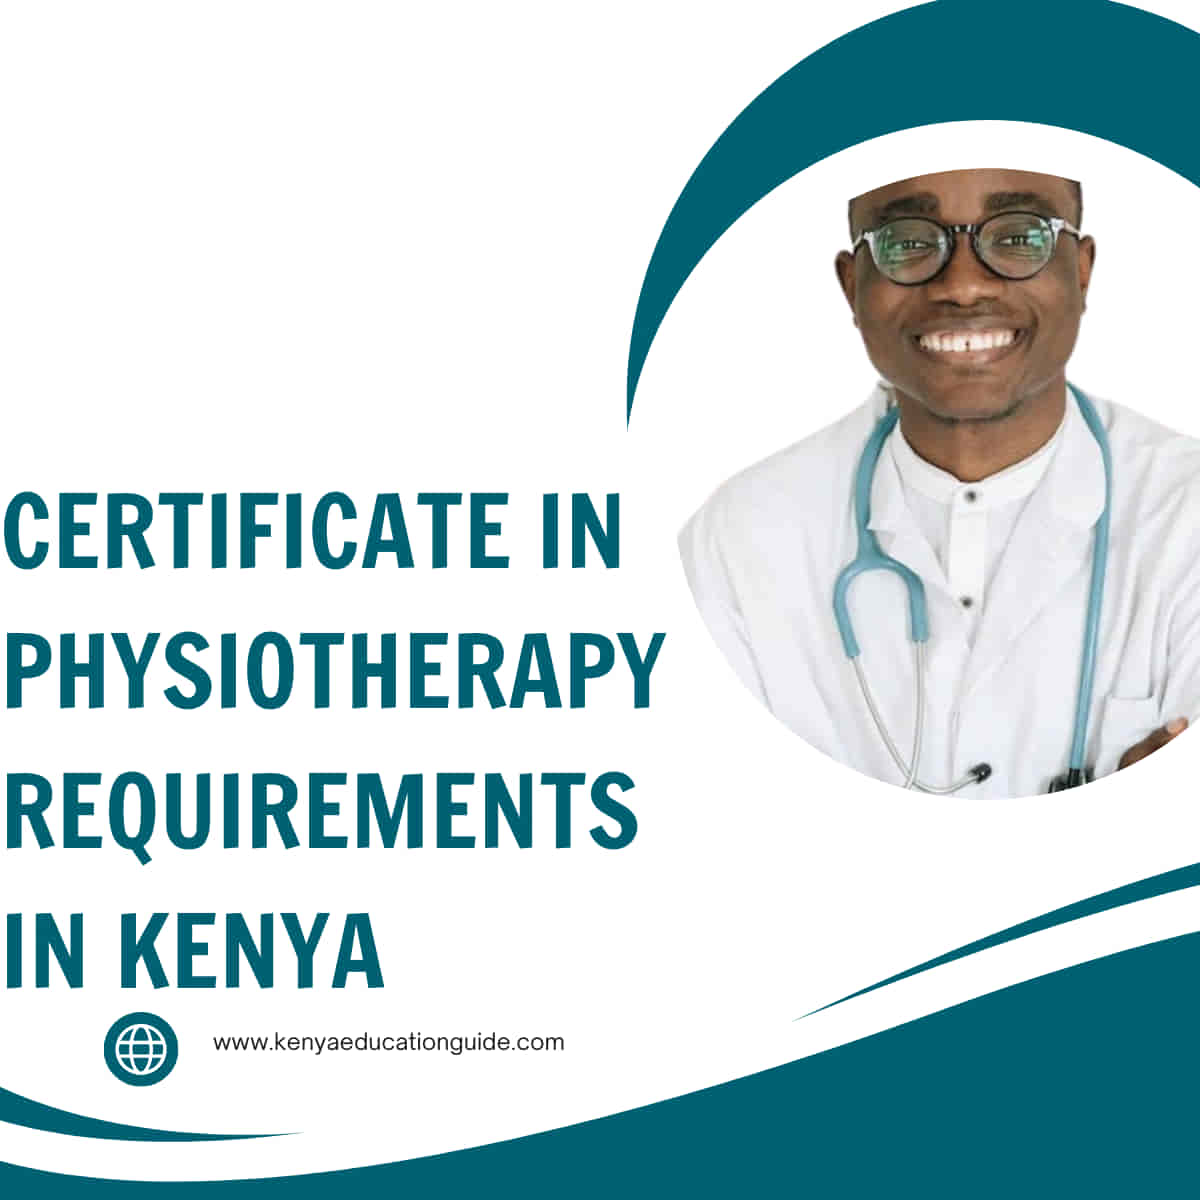 Certificate in physiotherapy requirements in Kenya